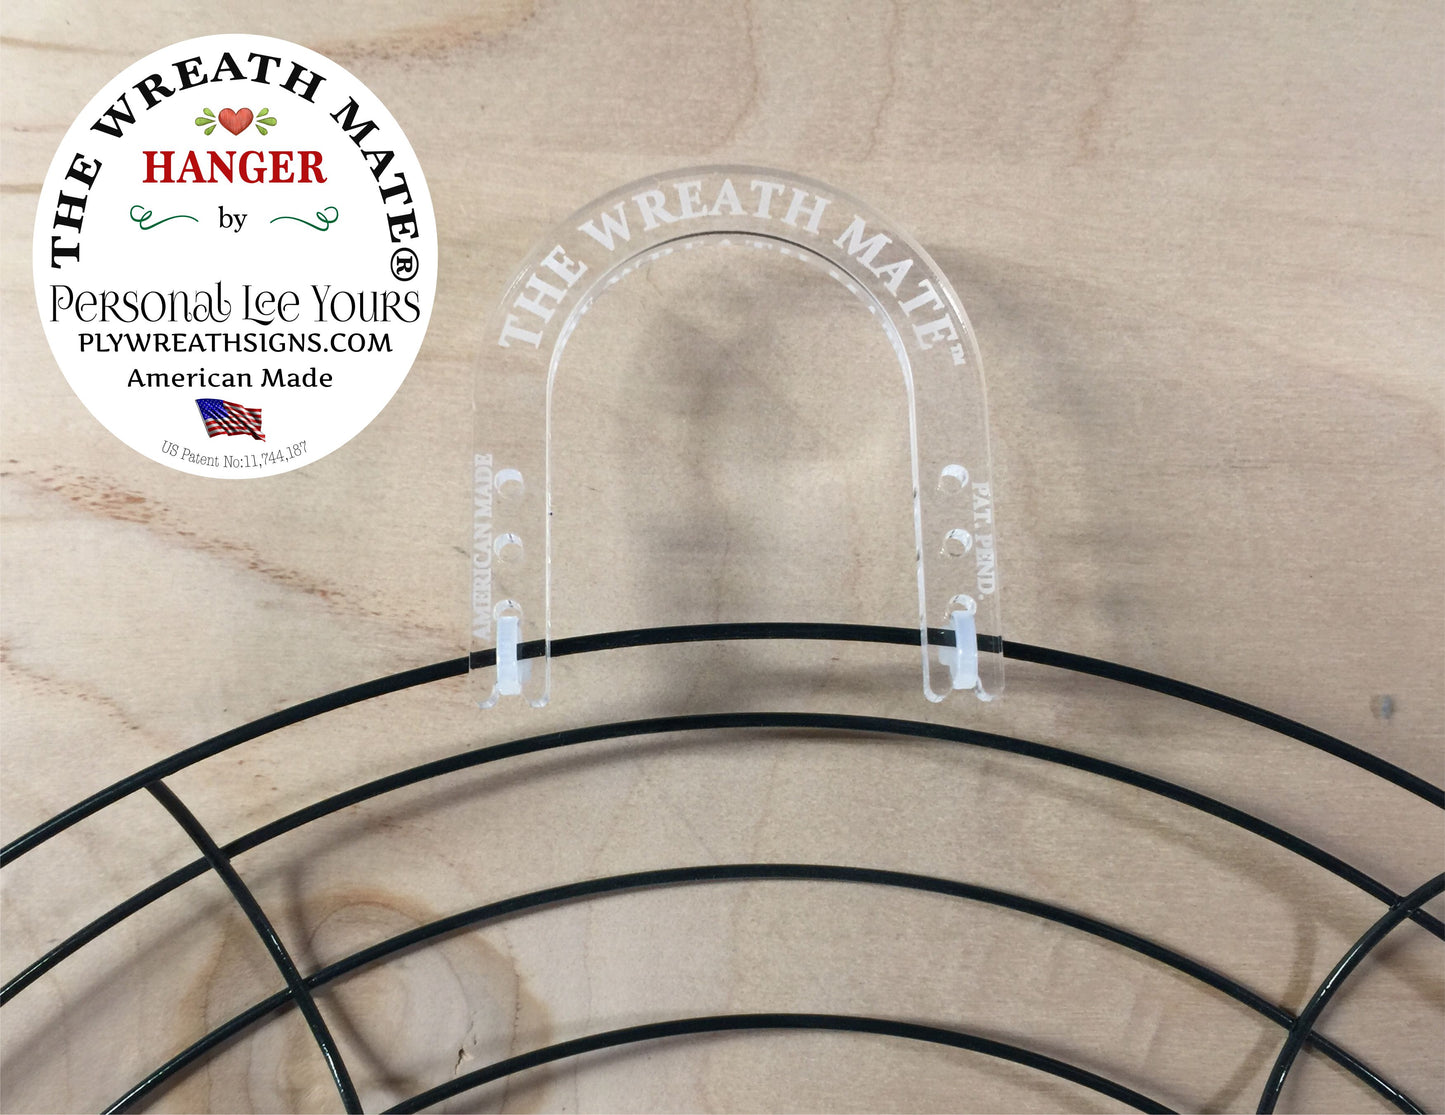 The Wreath Mate - Hanger * Available in Packs of 5, 10 and 25